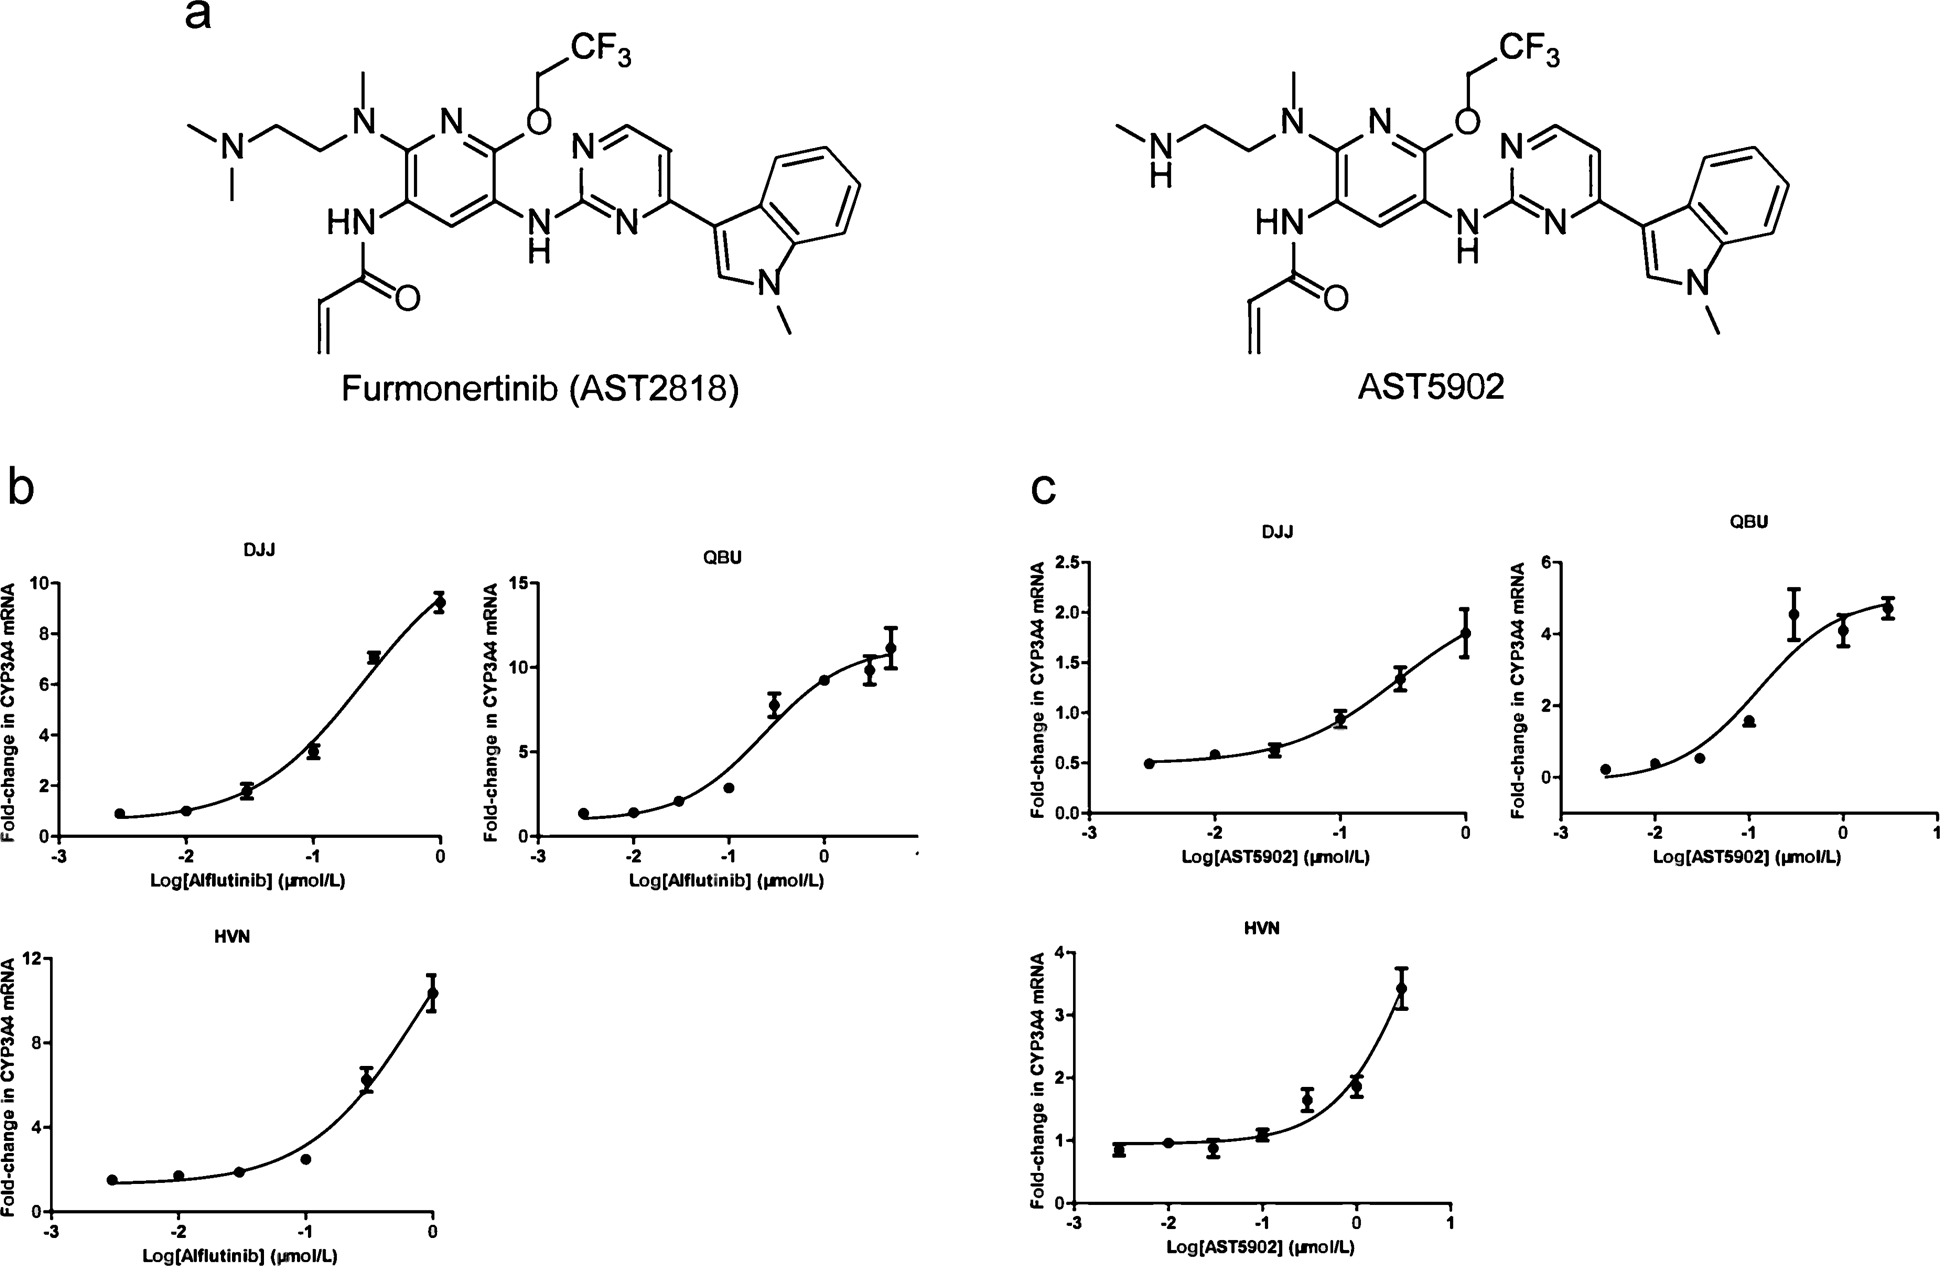 Furmonertinib (Alflutinib, AST2818) is a potential positive control drug  comparable to rifampin for evaluation of CYP3A4 induction in  sandwich-cultured primary human hepatocytes | Acta Pharmacologica Sinica